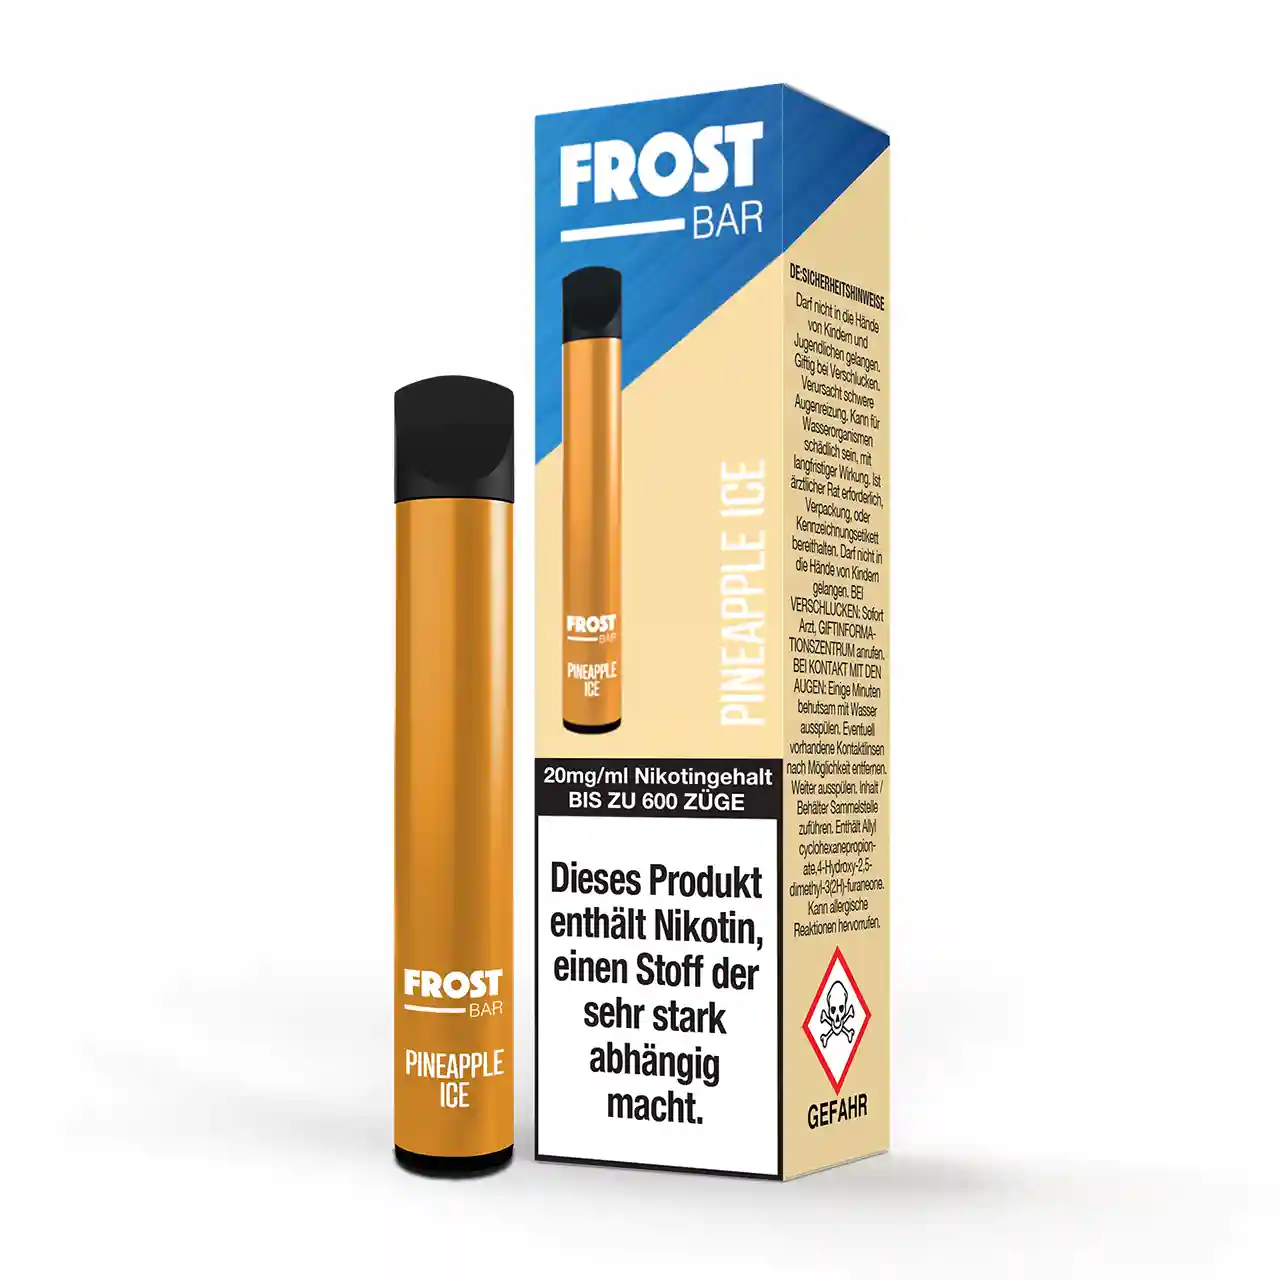 Frost Bar Pineapple Ice